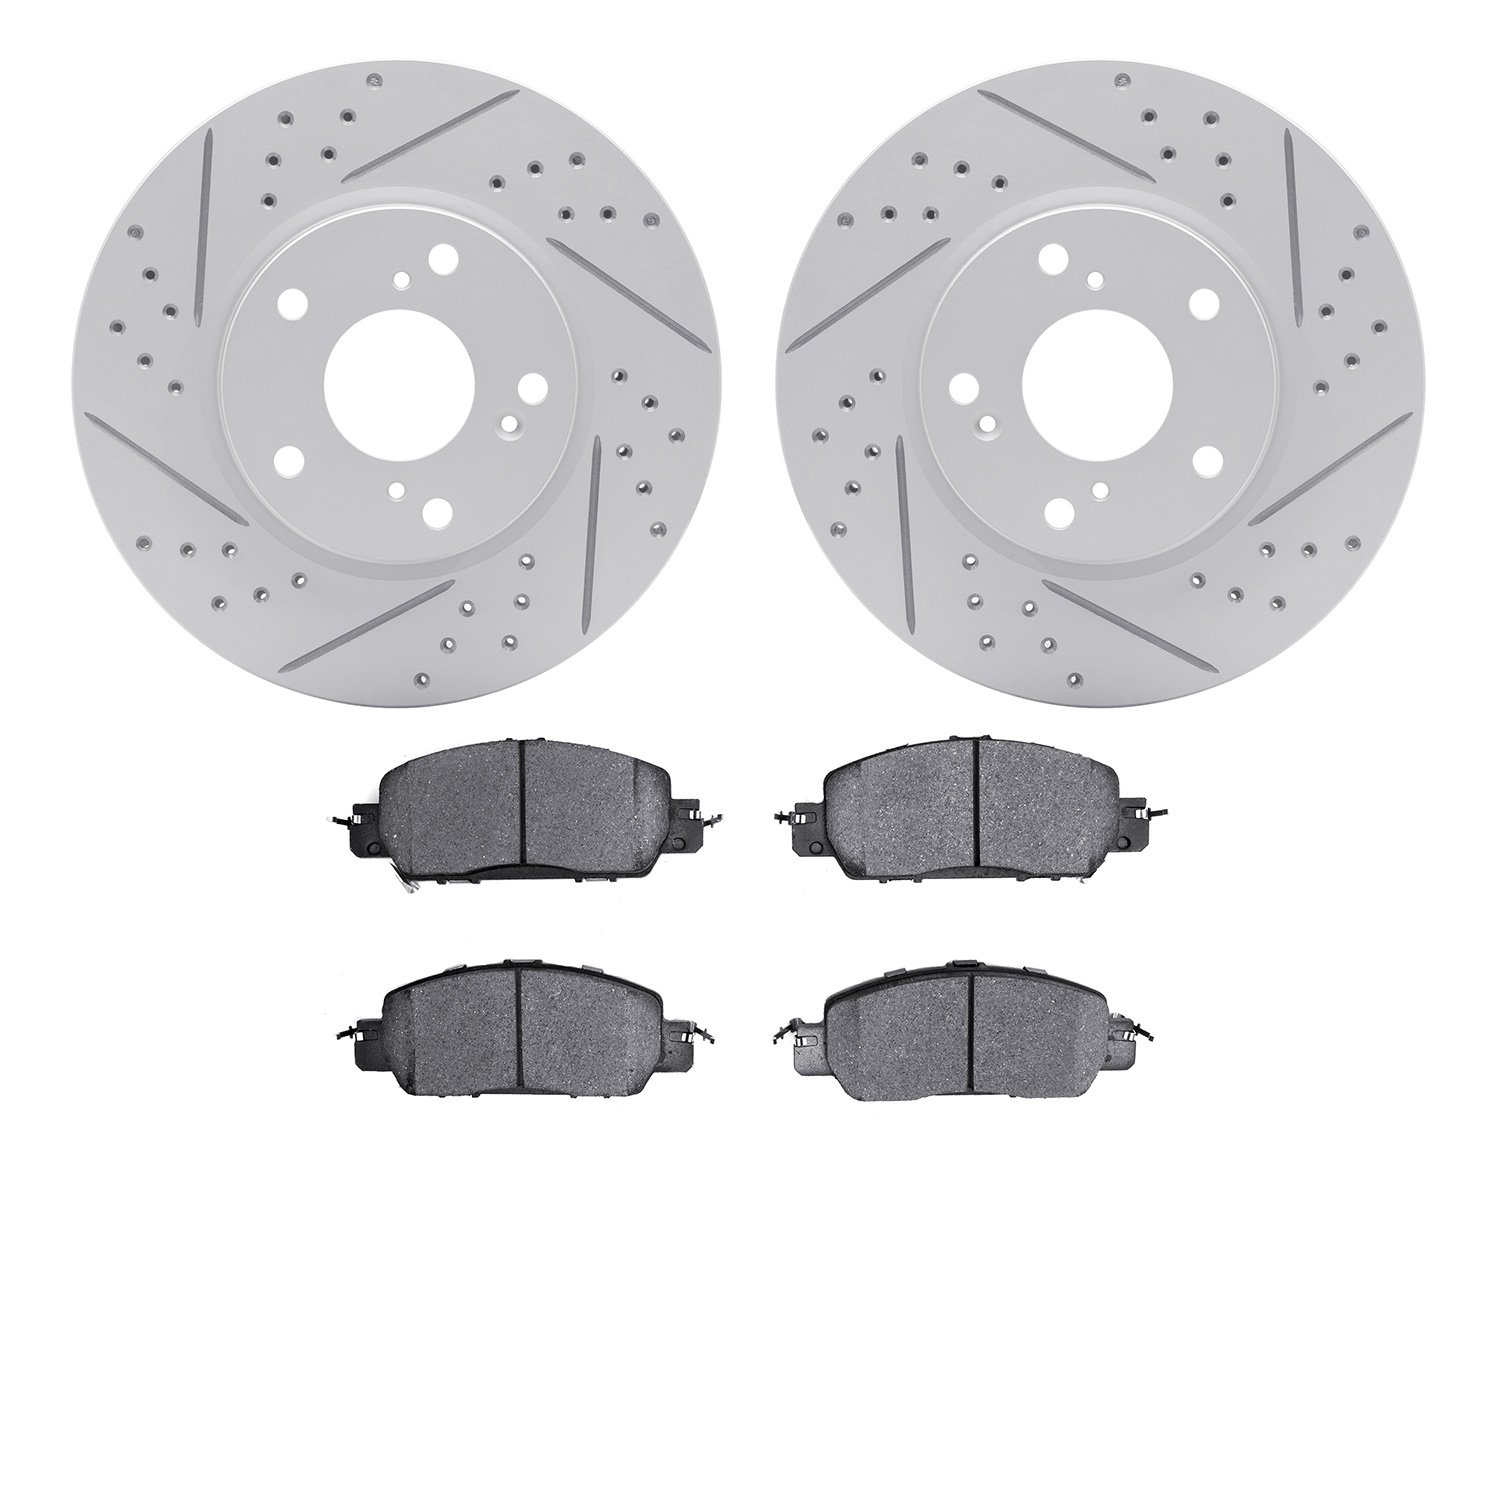 2502-59093 Geoperformance Drilled/Slotted Rotors w/5000 Advanced Brake Pads Kit, 2016-2017 Acura/Honda, Position: Front